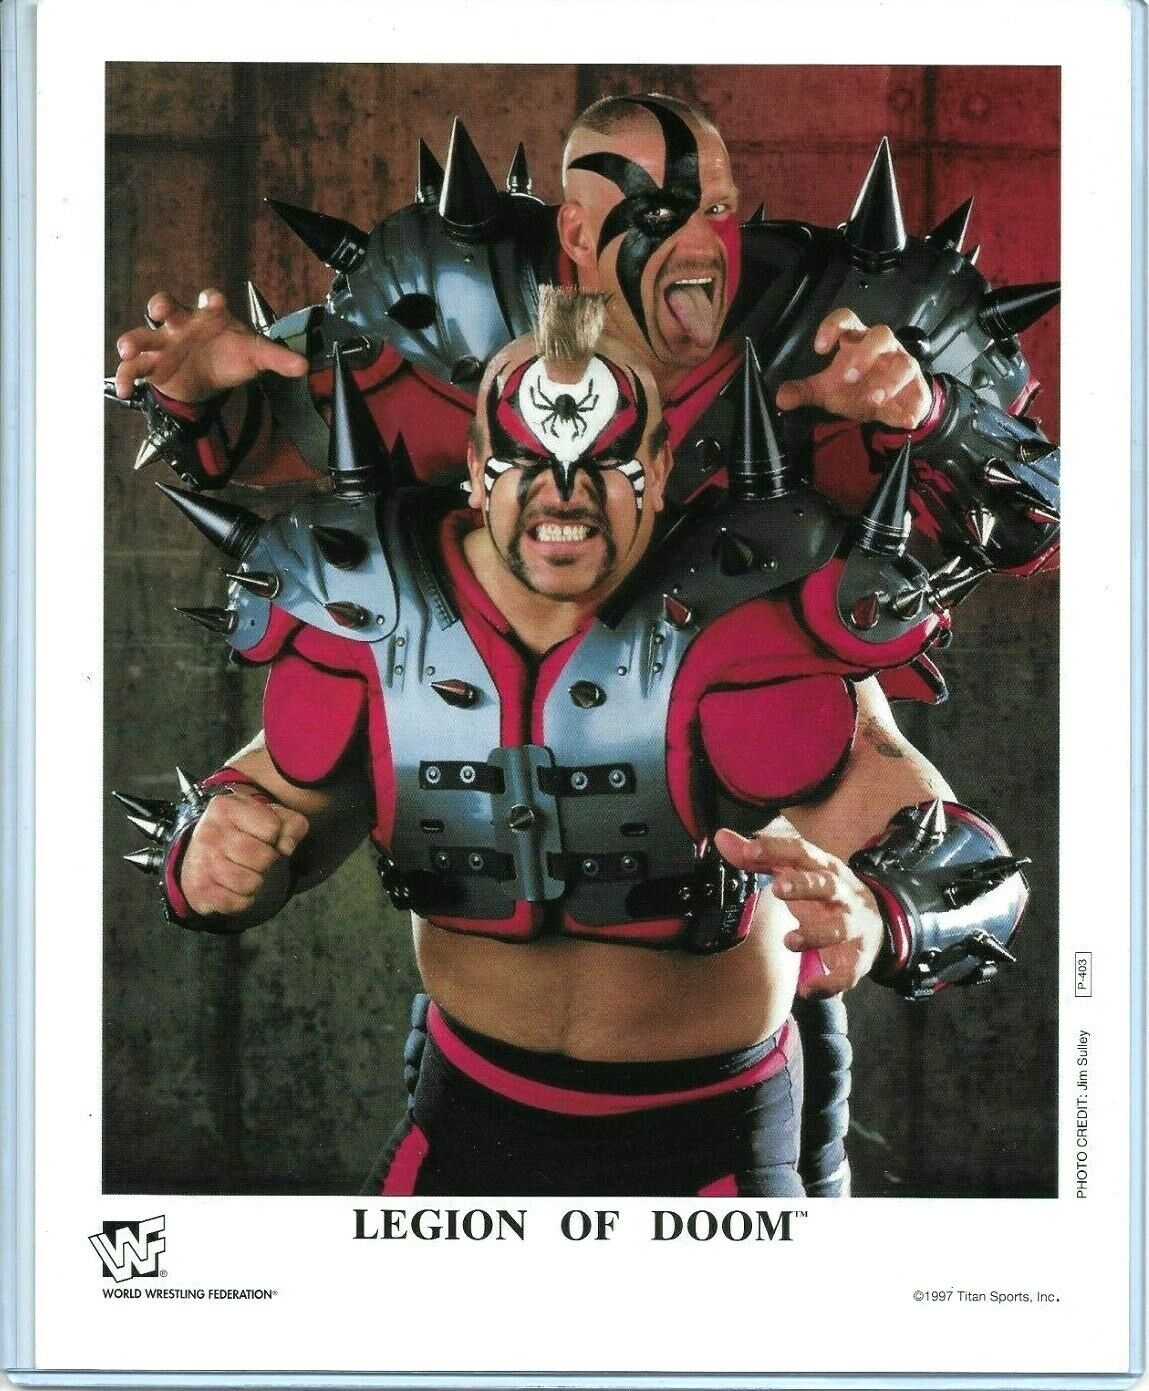 WWE LEGION OF DOOM P-403 OFFICIAL LICENSED AUTHENTIC ORIGINAL 8X10 PROMO Photo Poster painting